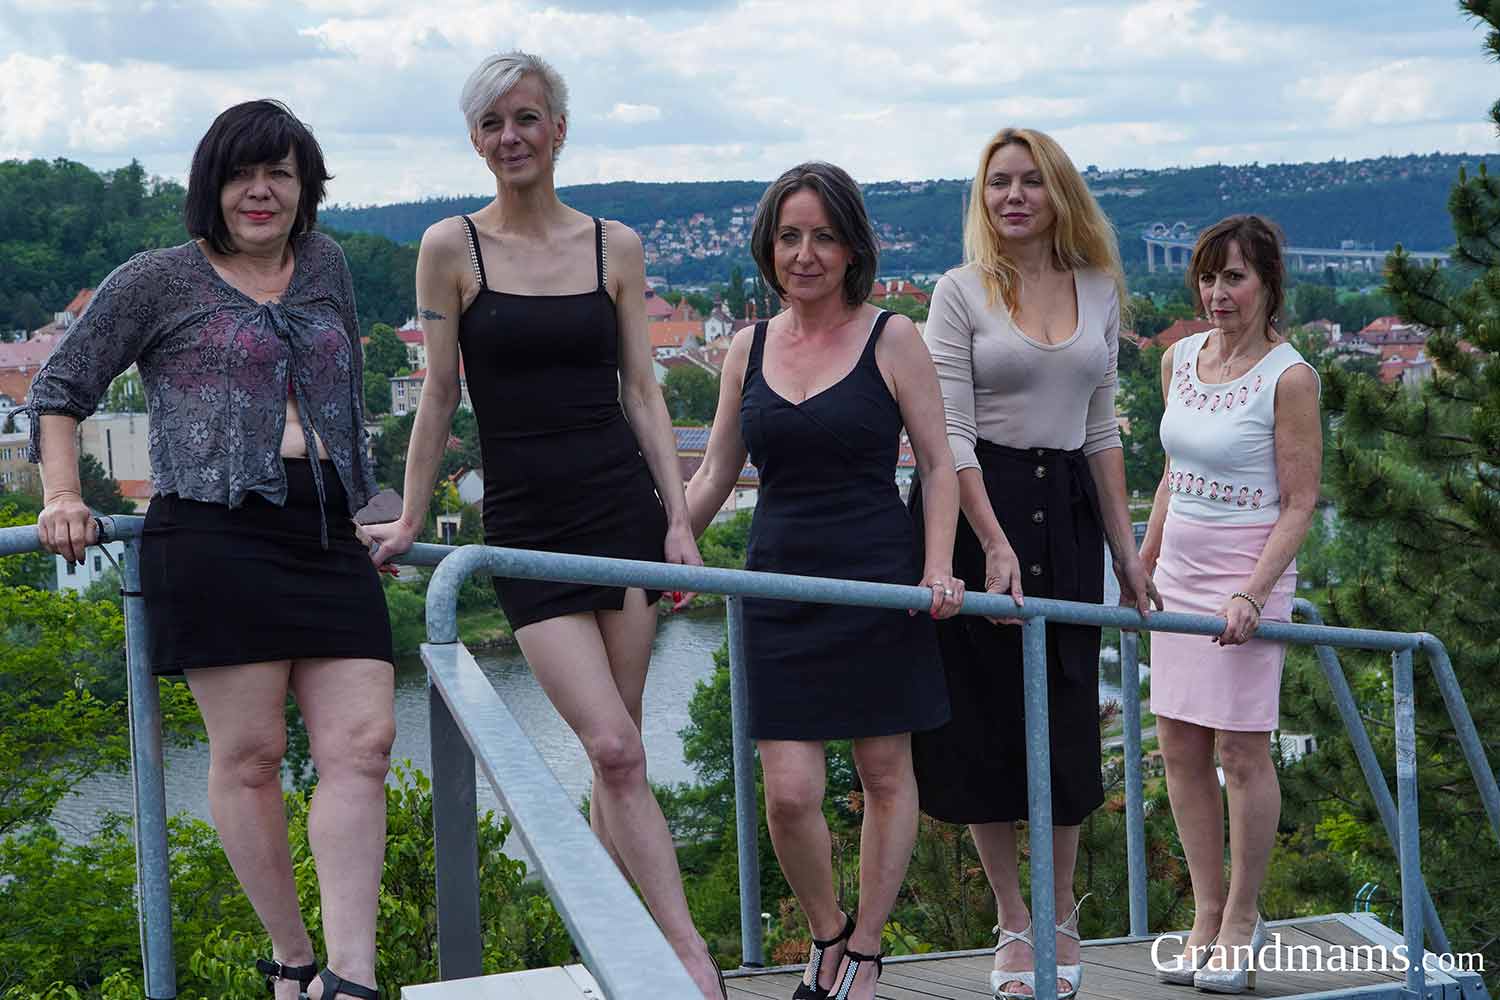 Old Women Orgy - Old Women Grandmams rooftop orgy - Loveitdaily